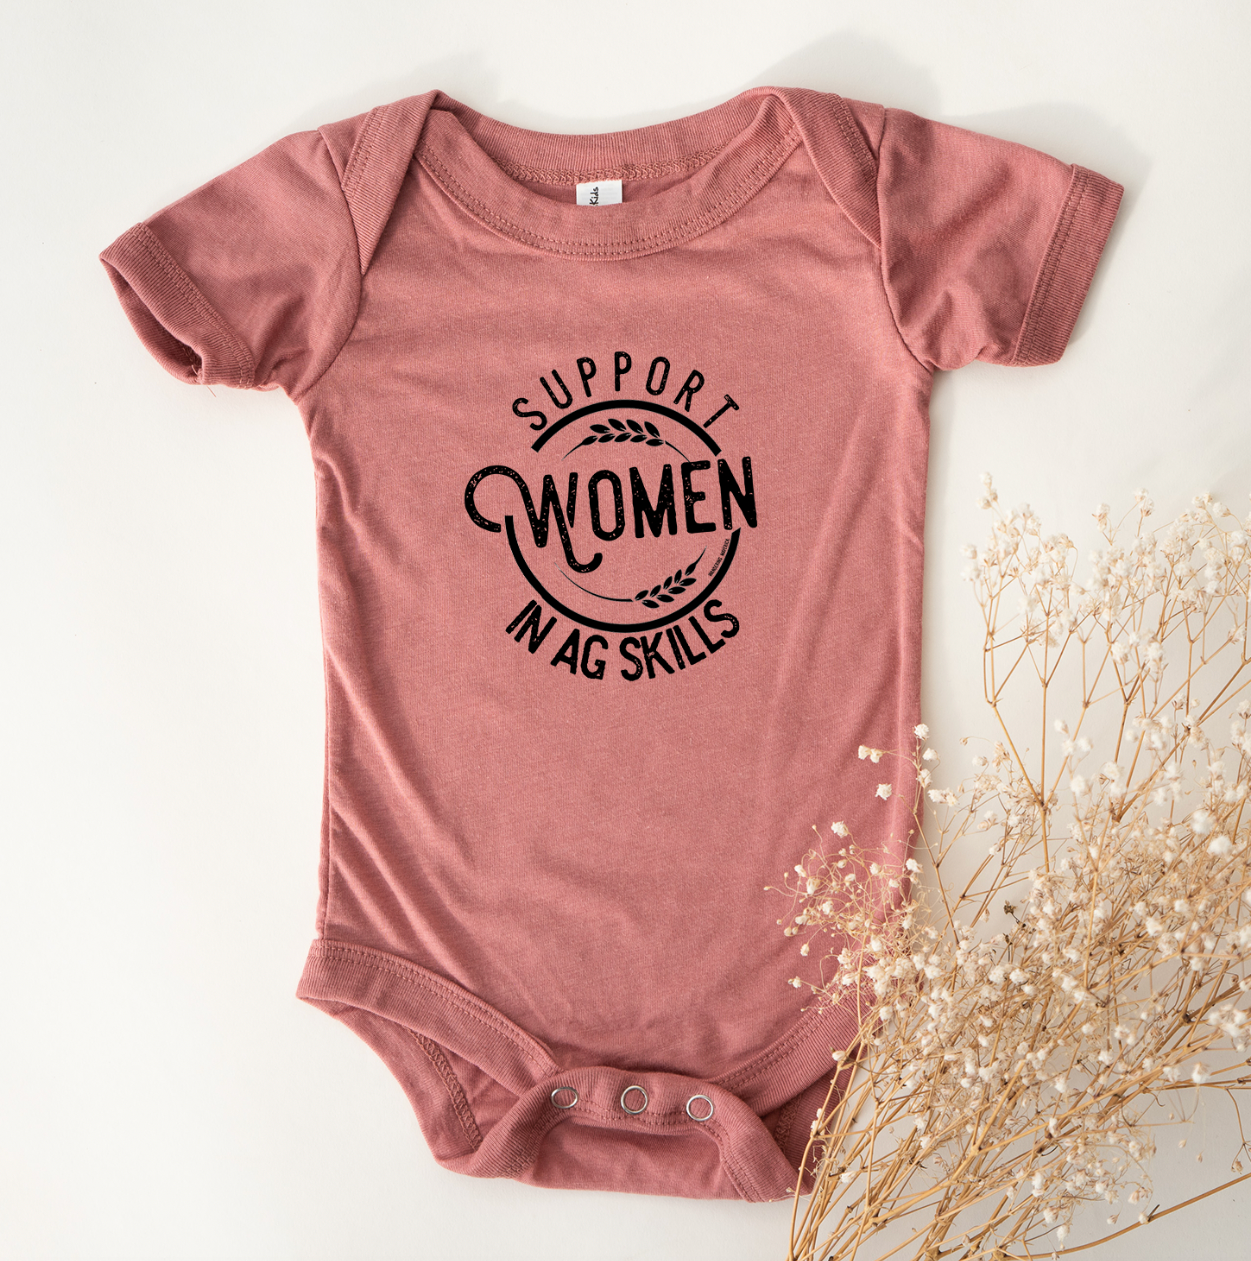 Support Women In Ag Skills One Piece/T-Shirt (Newborn - Youth XL) - Multiple Colors!